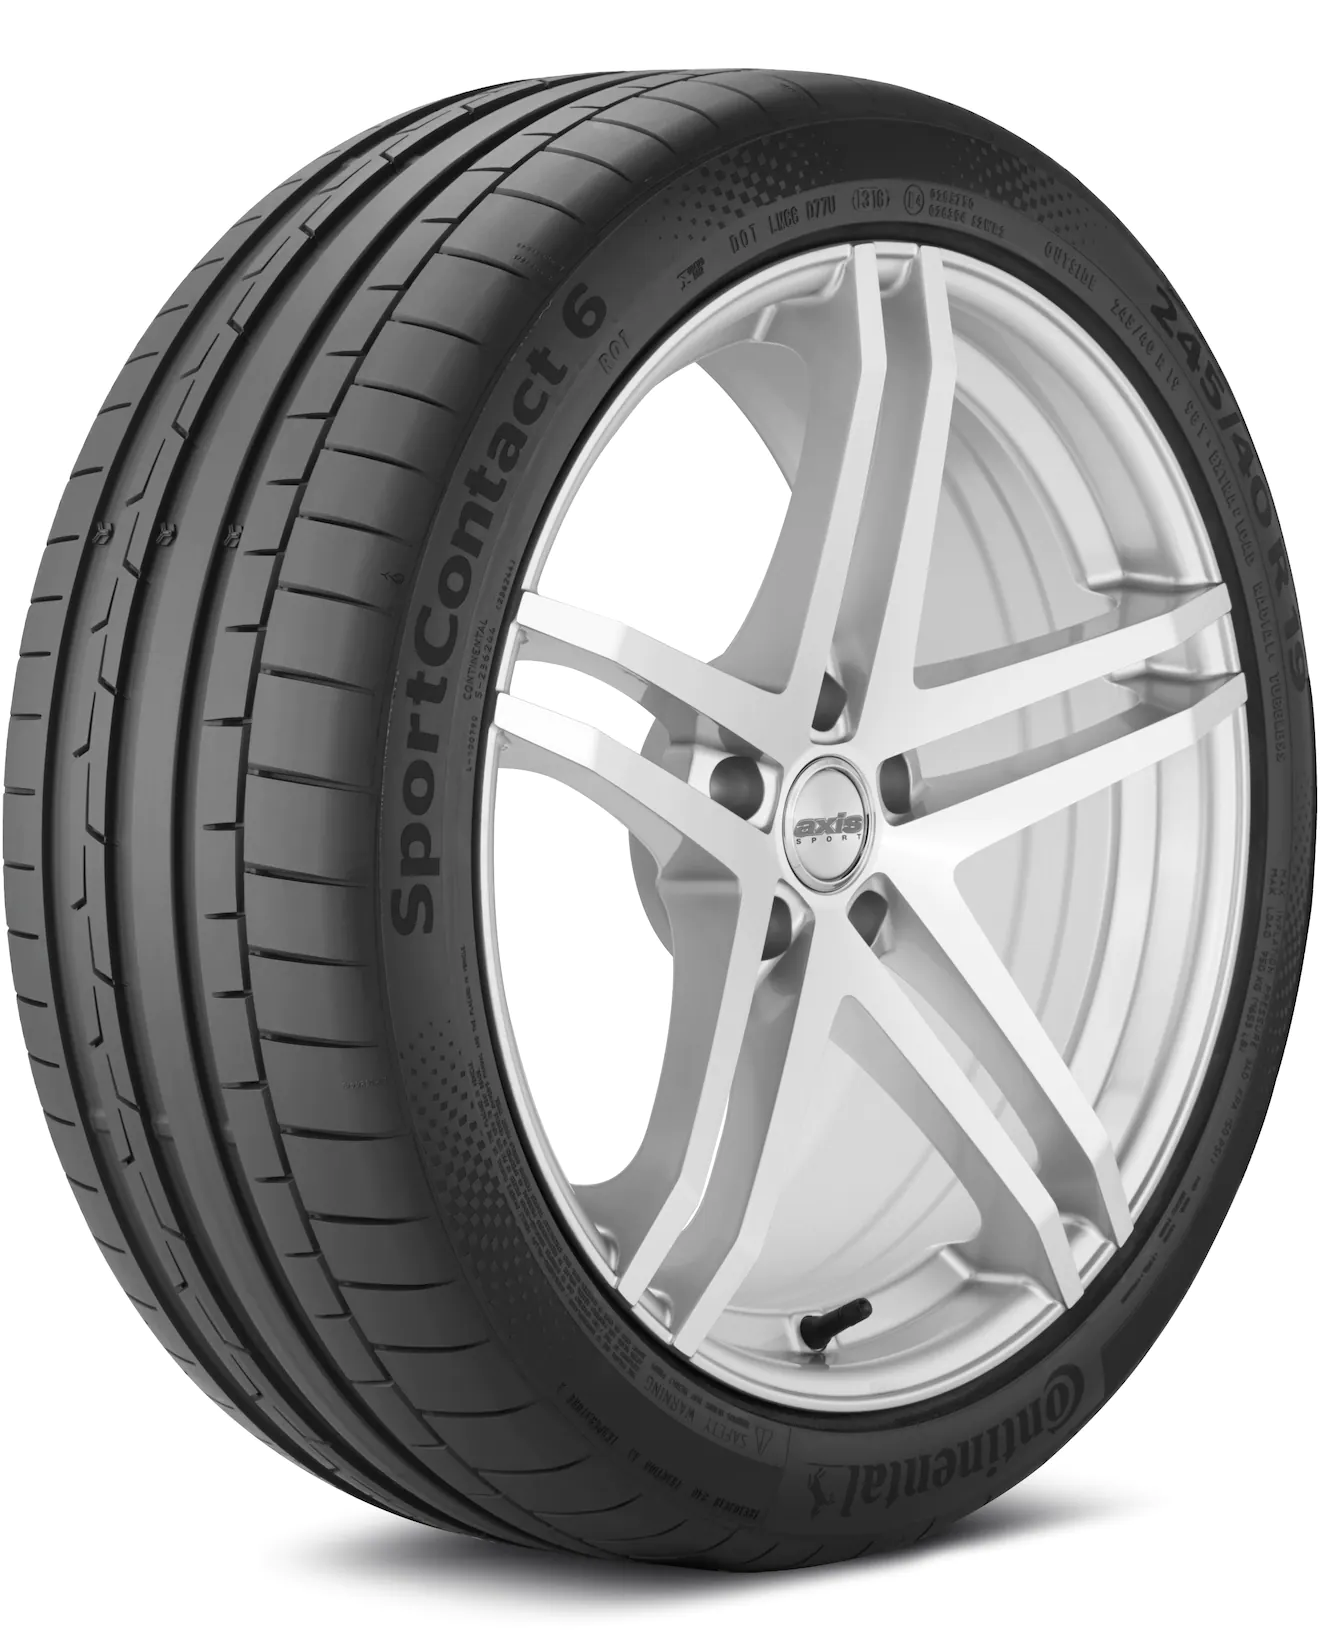 Continental SportContact 6 295/35 R20 105Y XL MO1 FP